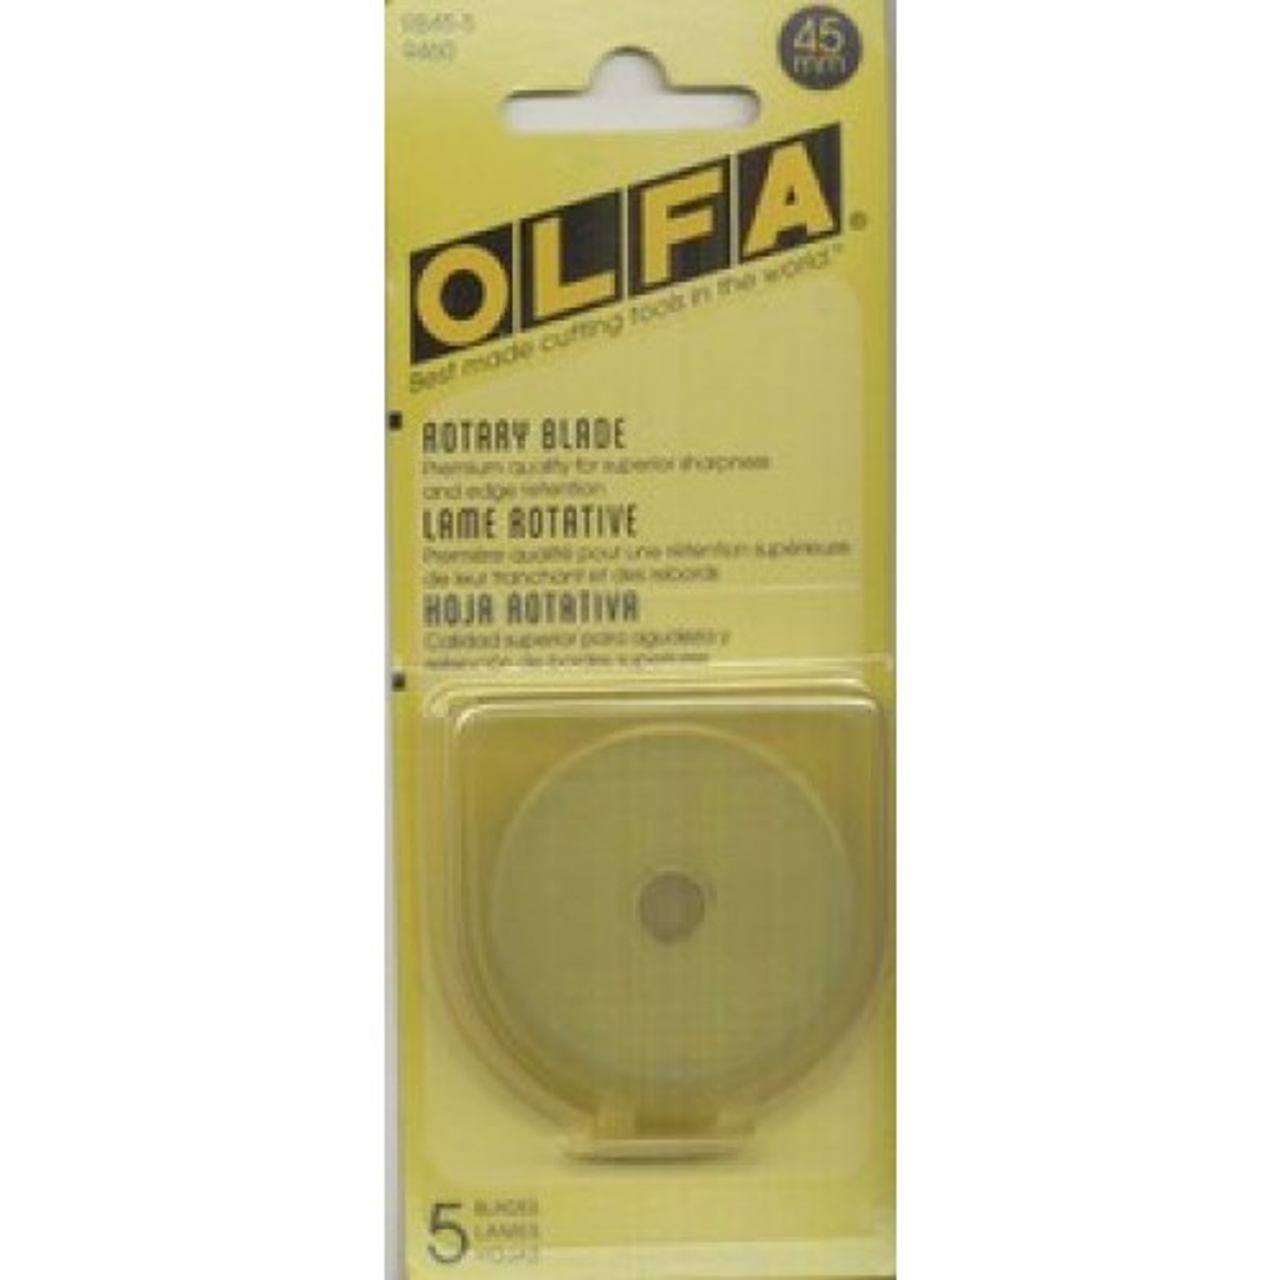 Olfa RB45-5 Rotary Cutter Blades (5 pack)